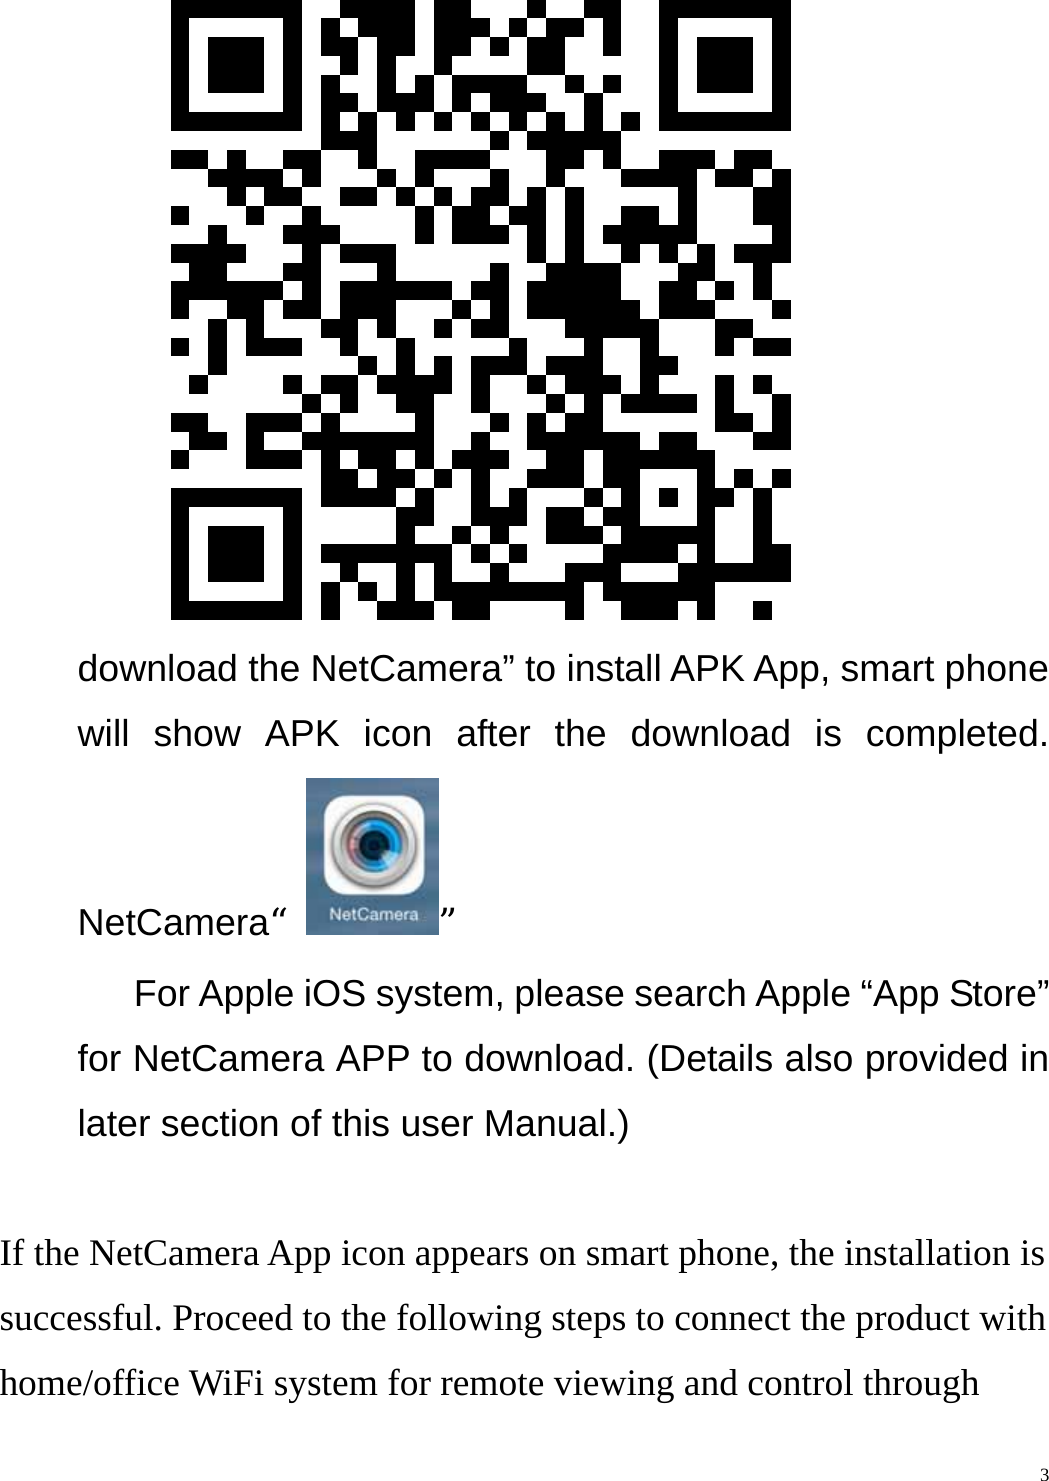    3       download the NetCamera” to install APK App, smart phone will show APK icon after the download is completed. NetCamera“”       For Apple iOS system, please search Apple “App Store” for NetCamera APP to download. (Details also provided in later section of this user Manual.)  If the NetCamera App icon appears on smart phone, the installation is successful. Proceed to the following steps to connect the product with home/office WiFi system for remote viewing and control through 